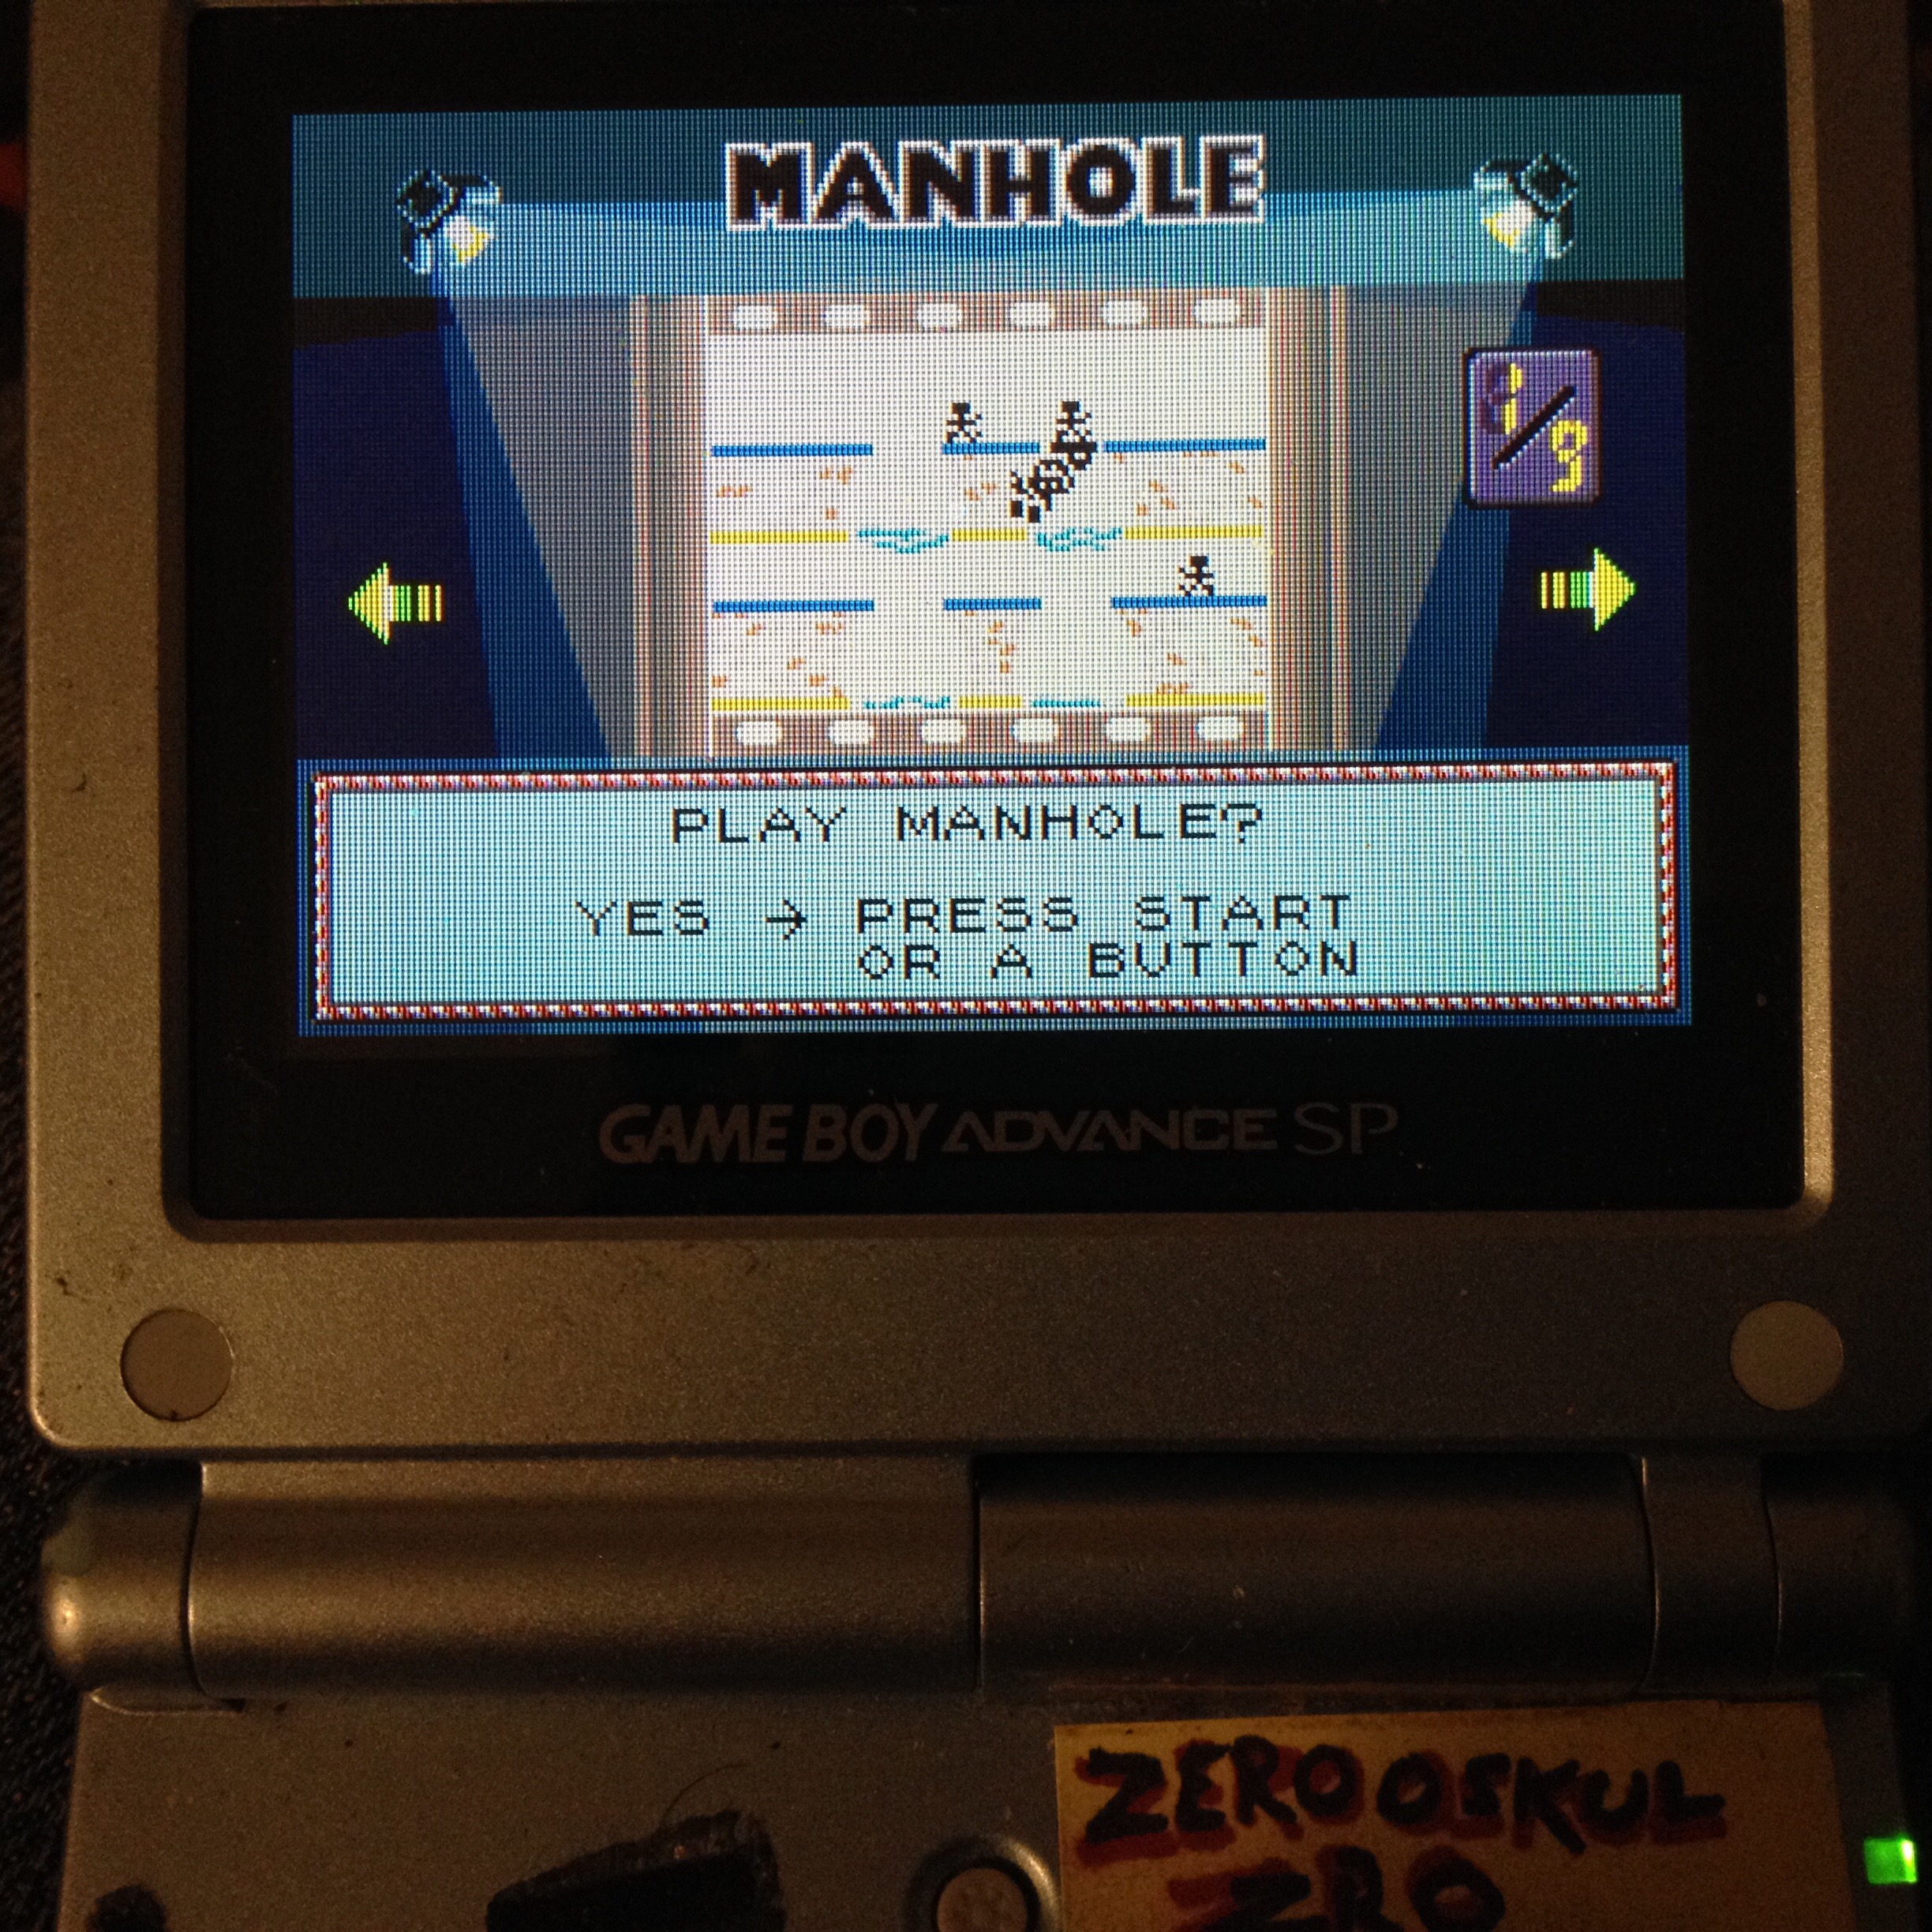 zerooskul: Game & Watch Gallery 4: Manhole [Classic: Easy] (GBA) 298 points on 2019-11-24 16:37:22